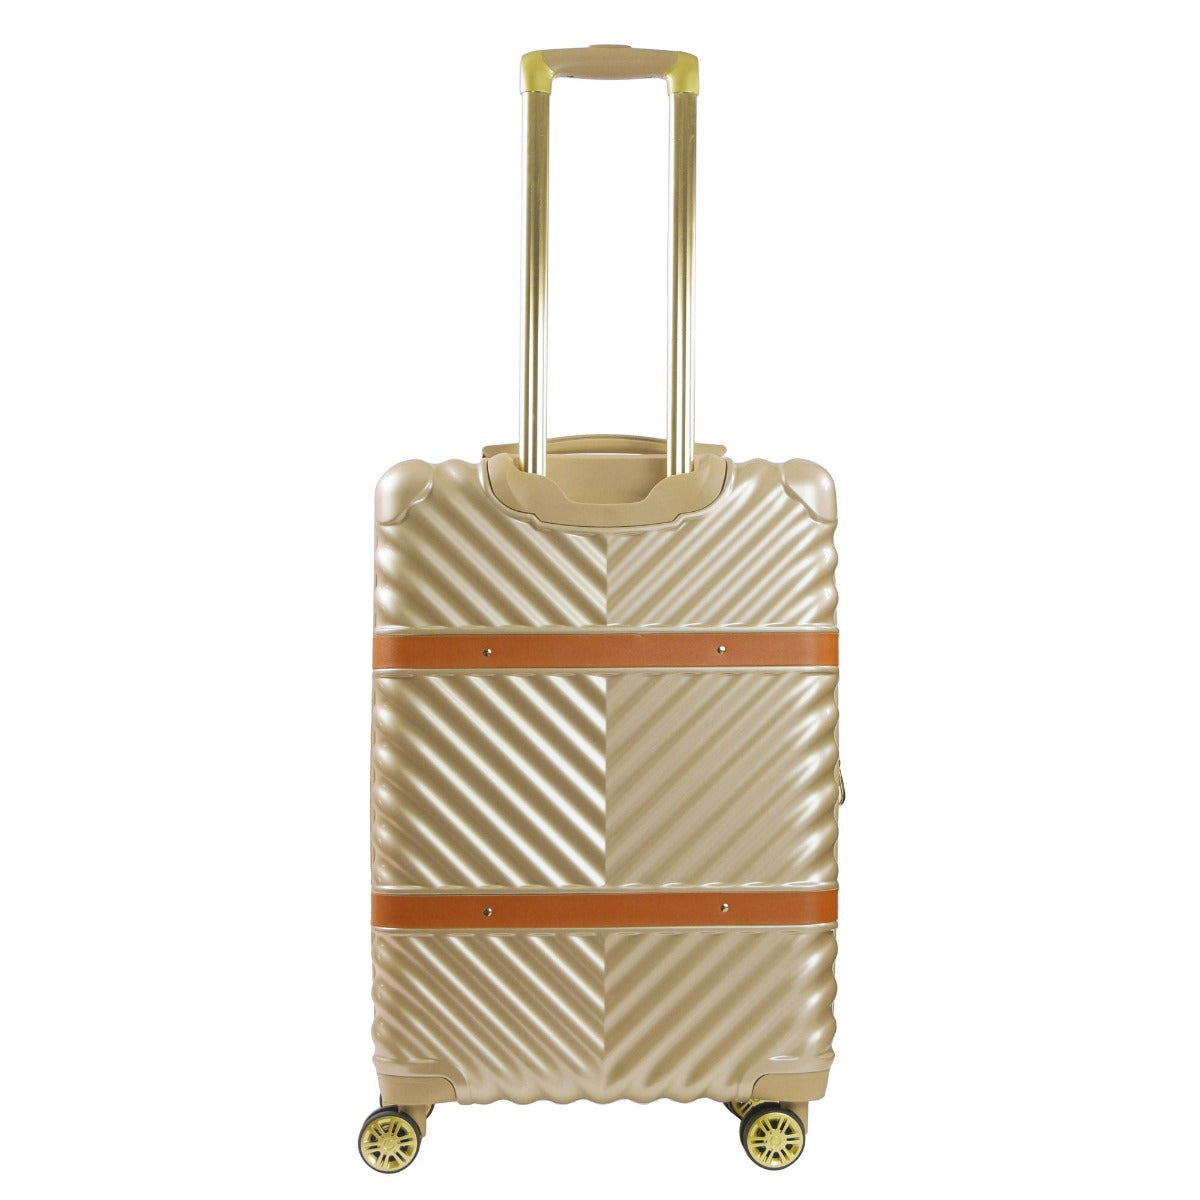 Christian Siriano New York Stella 25 inch hardside spinner suitcase taupe - best durable checked luggage for travelling